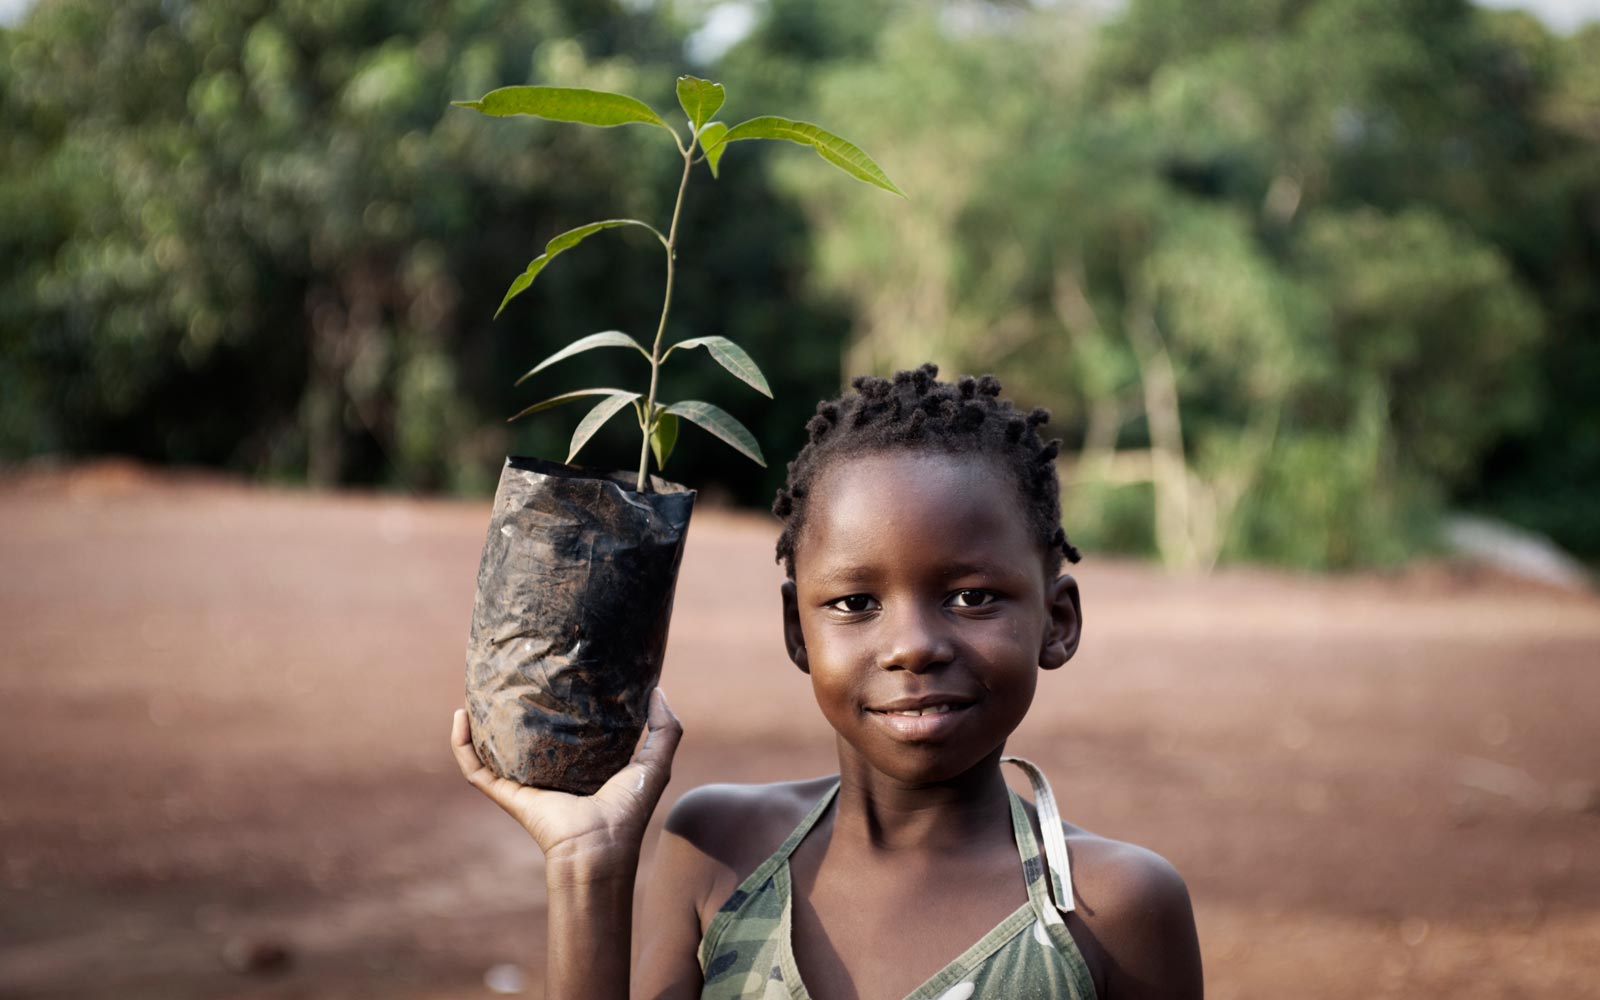 African child in a rural African setting, holding a bagged plant ready for planting.